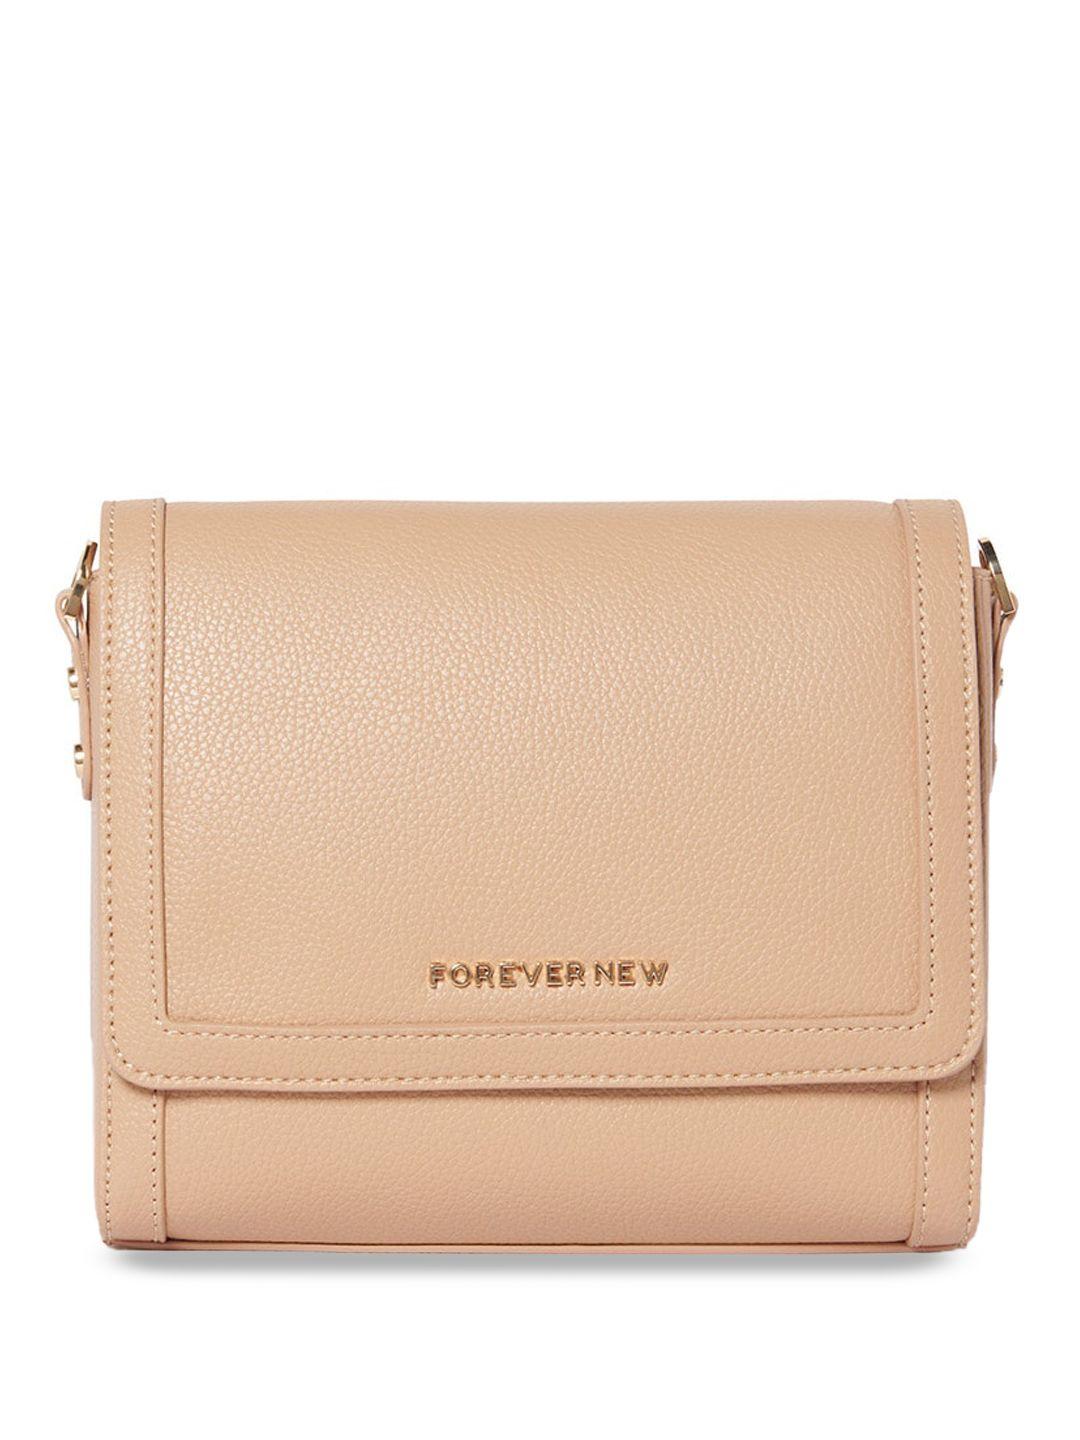 forever new structured textured sling bag